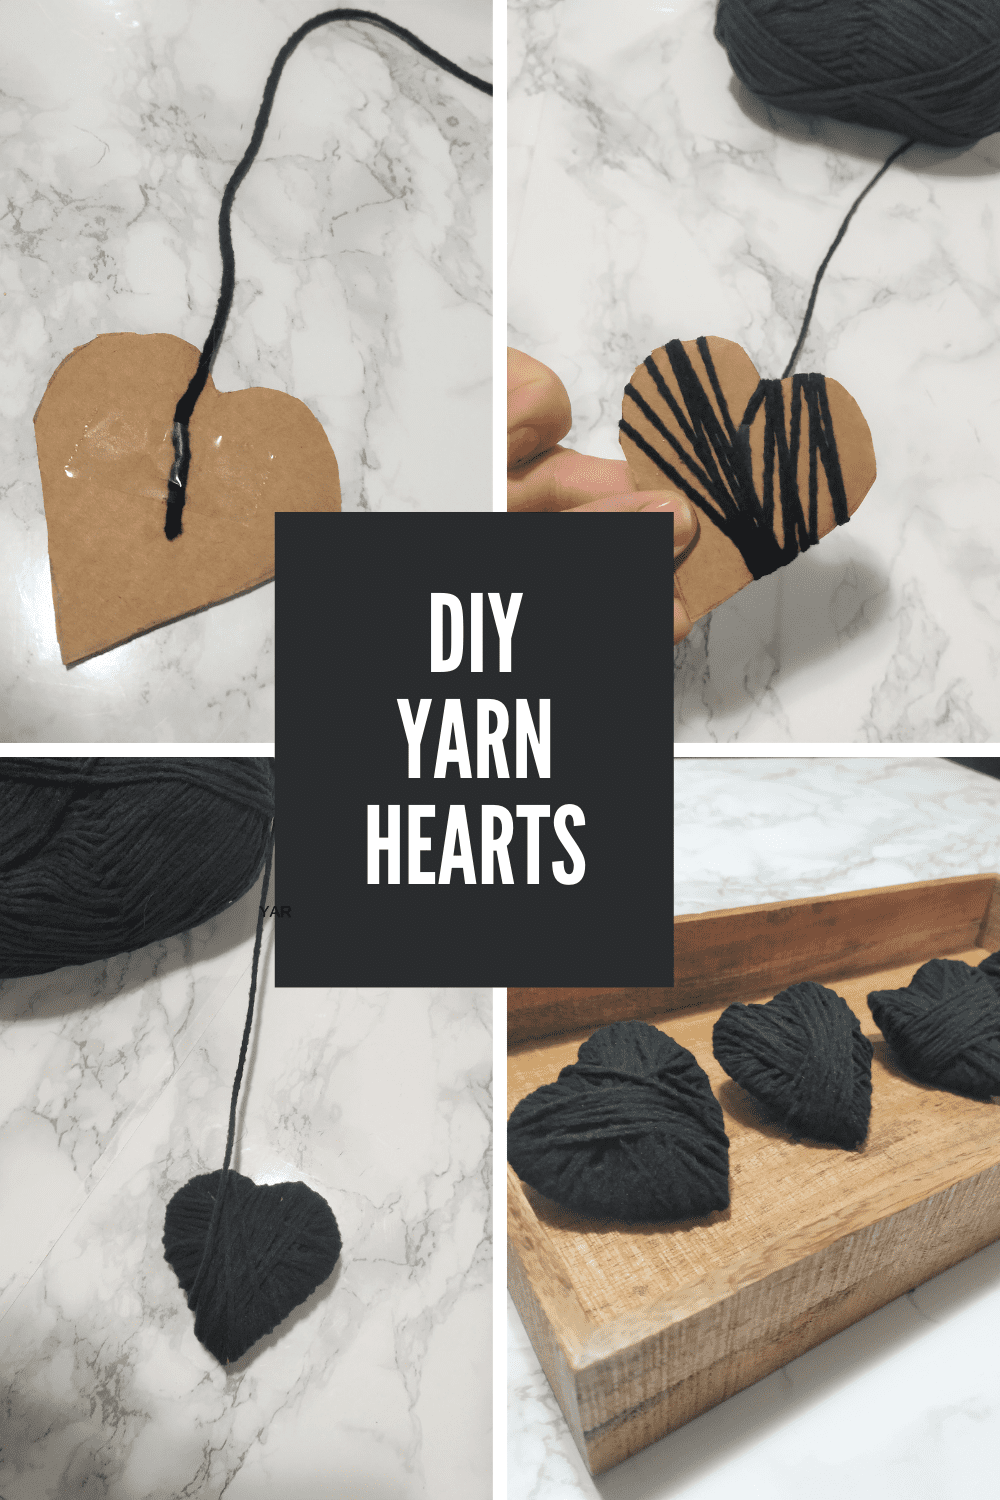 Collage images showing how to make yarn wrapped hearts.